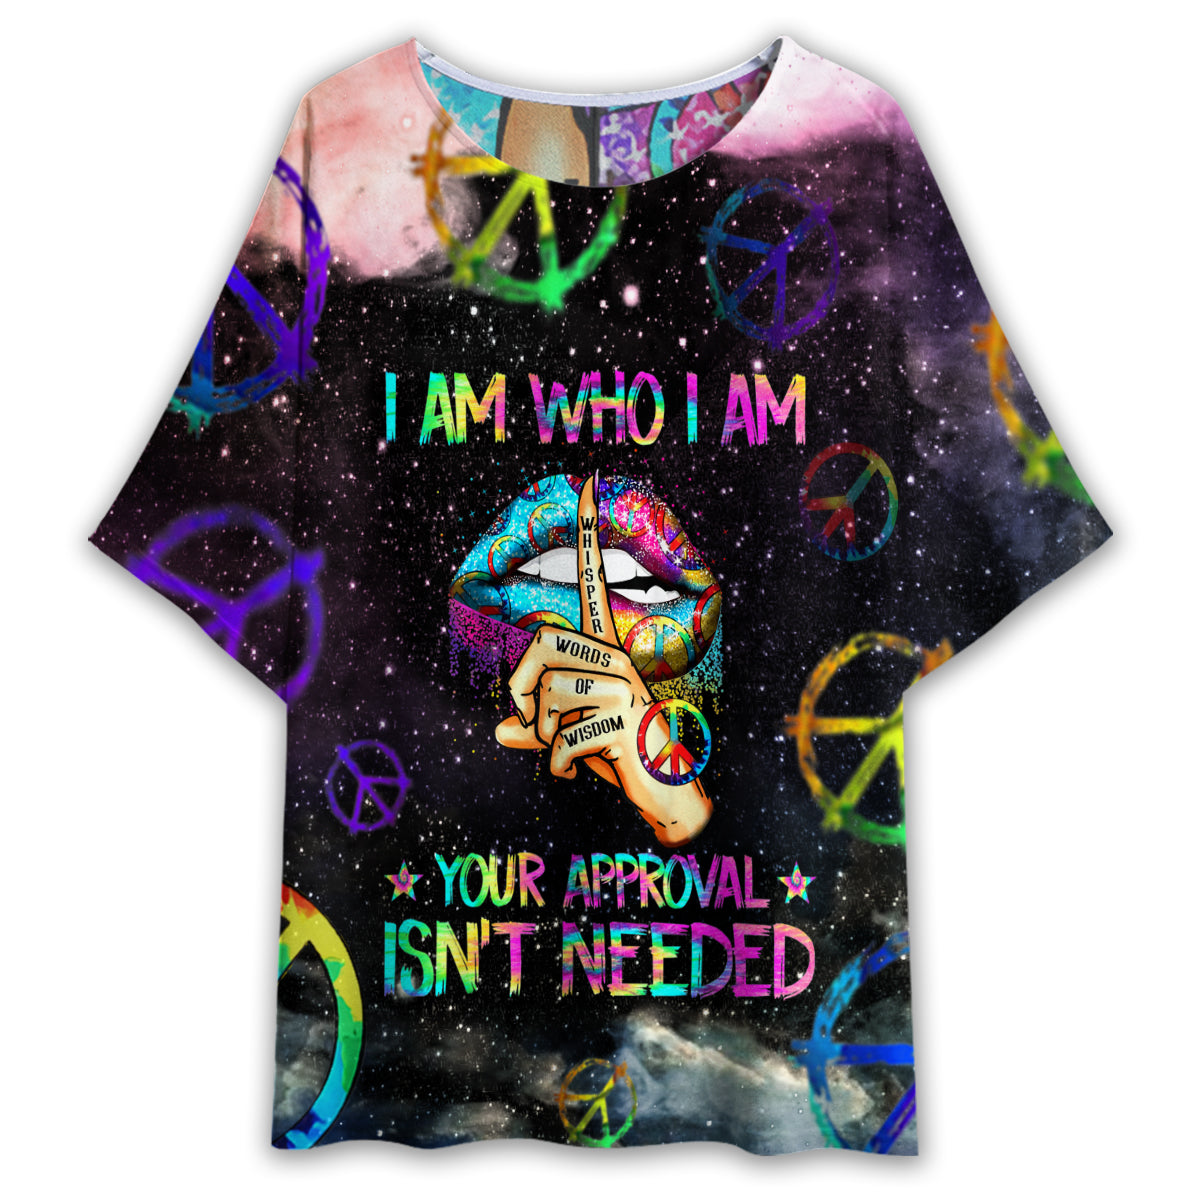 S Hippie I Am Who I Am Your Approval Isn't Needed Colorful - Women's T-shirt With Bat Sleeve - Owls Matrix LTD